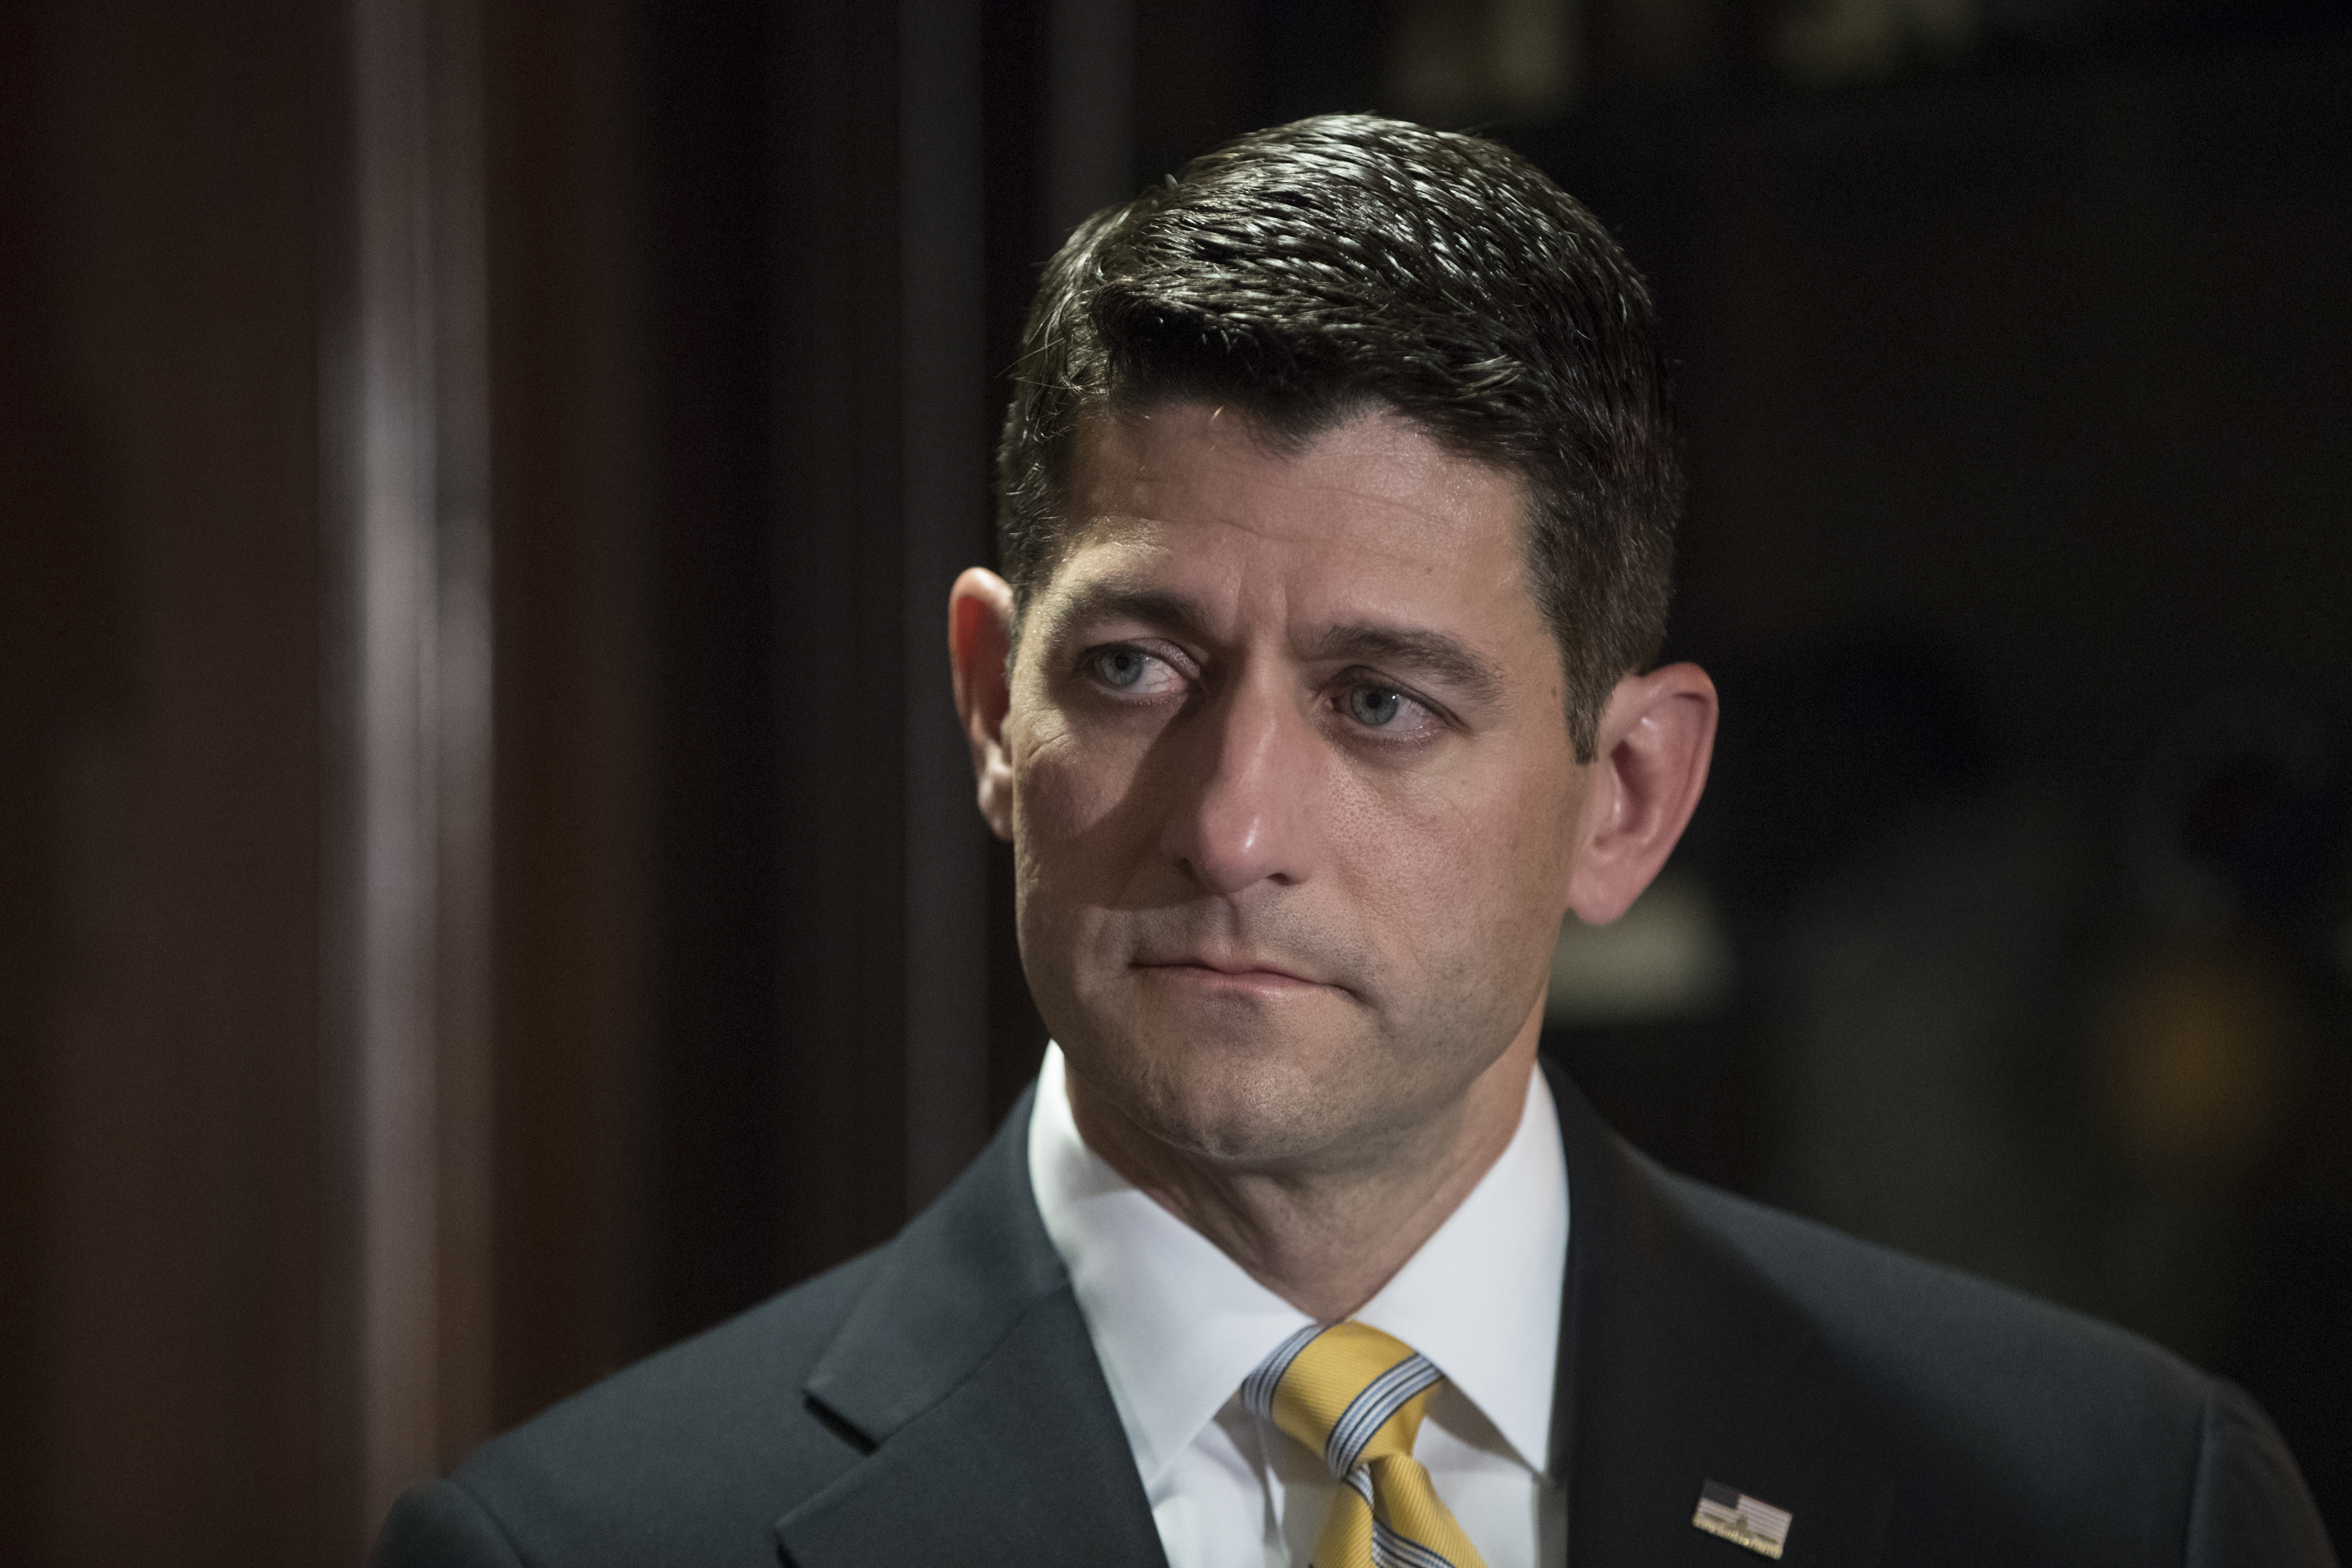 Paul Ryan on Donald Trump: 'He clearly did have a bad two weeks' - Washington Times